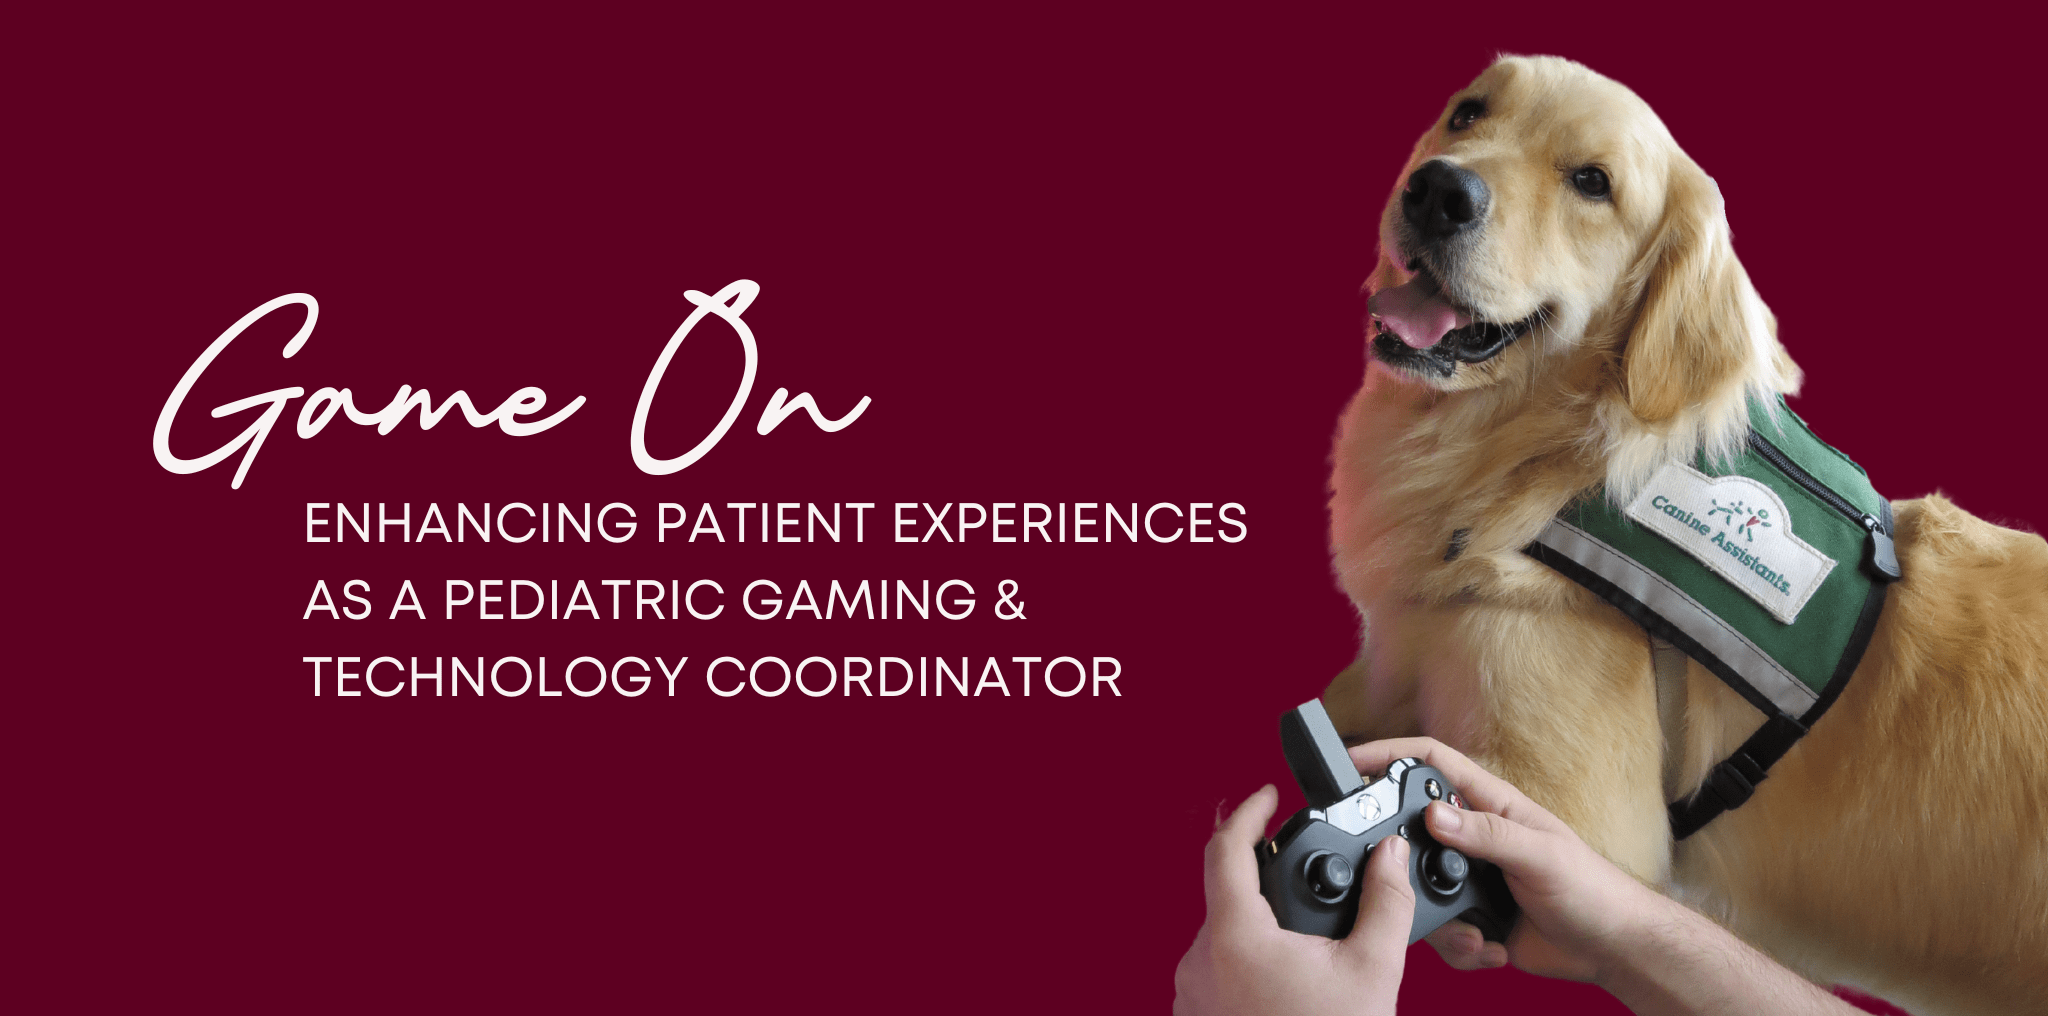 A Texas Children's canine assistant looks on as someone plays a video game. Text reads: Game On, enhancing patient experiences as a pediatric gaming and technology coordinator